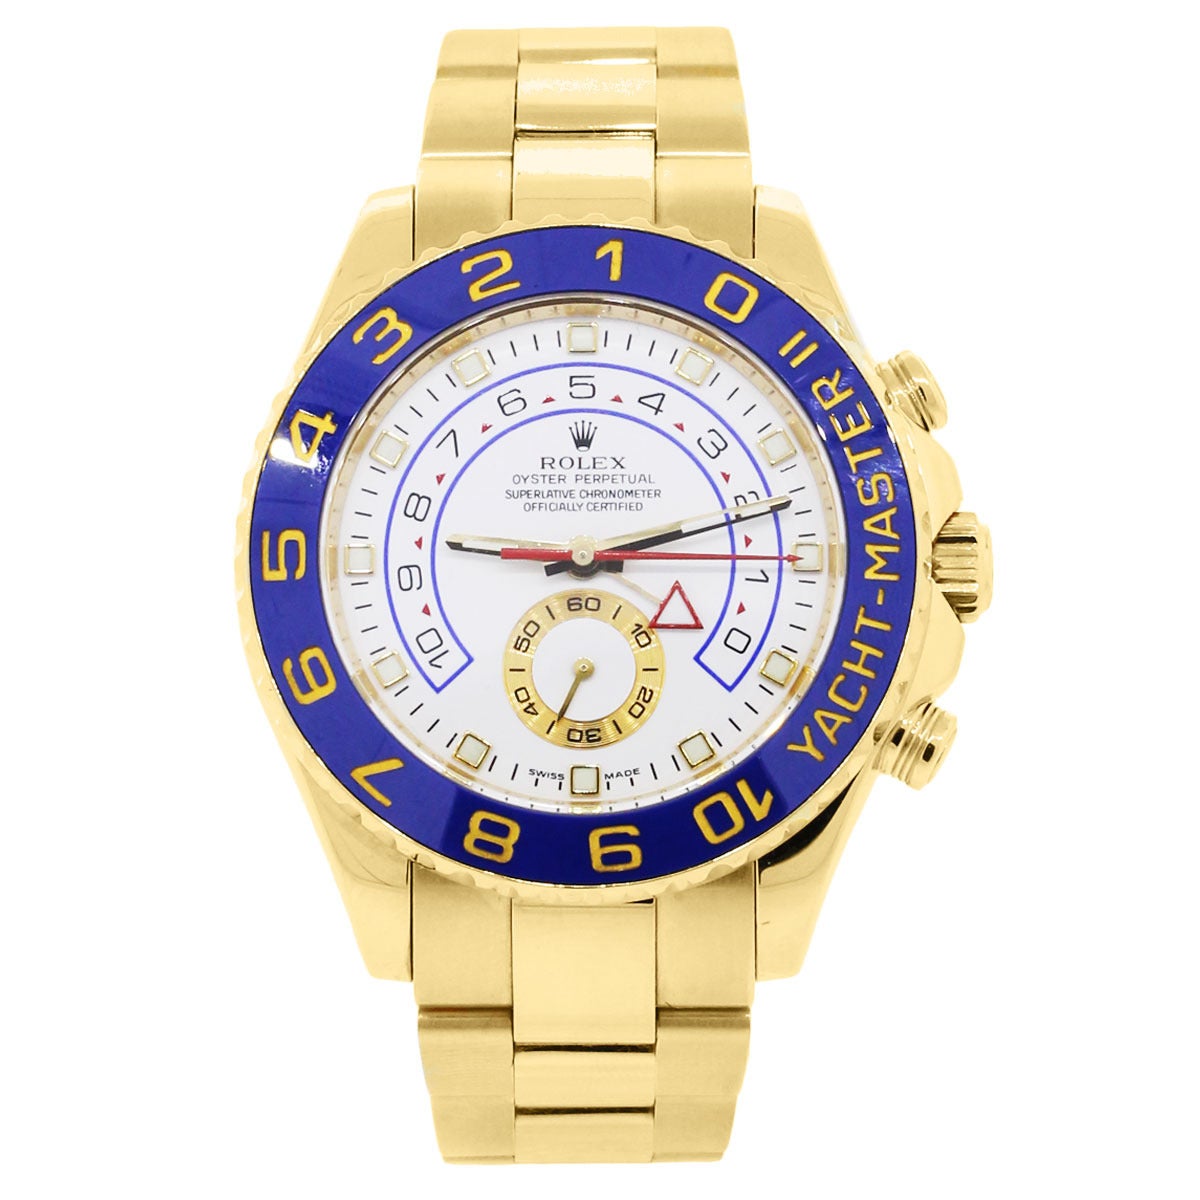 Brand: Rolex
Reference: 116688
Case Material: 18k Yellow Gold
Movement: Automatic
Case Measurement: 44mm
Dial: White chronograph dial (factory).
Crystal: Scratch Resistant Sapphire
Clasp: Fold Over Clasp
Size: Will Fit a 7.25